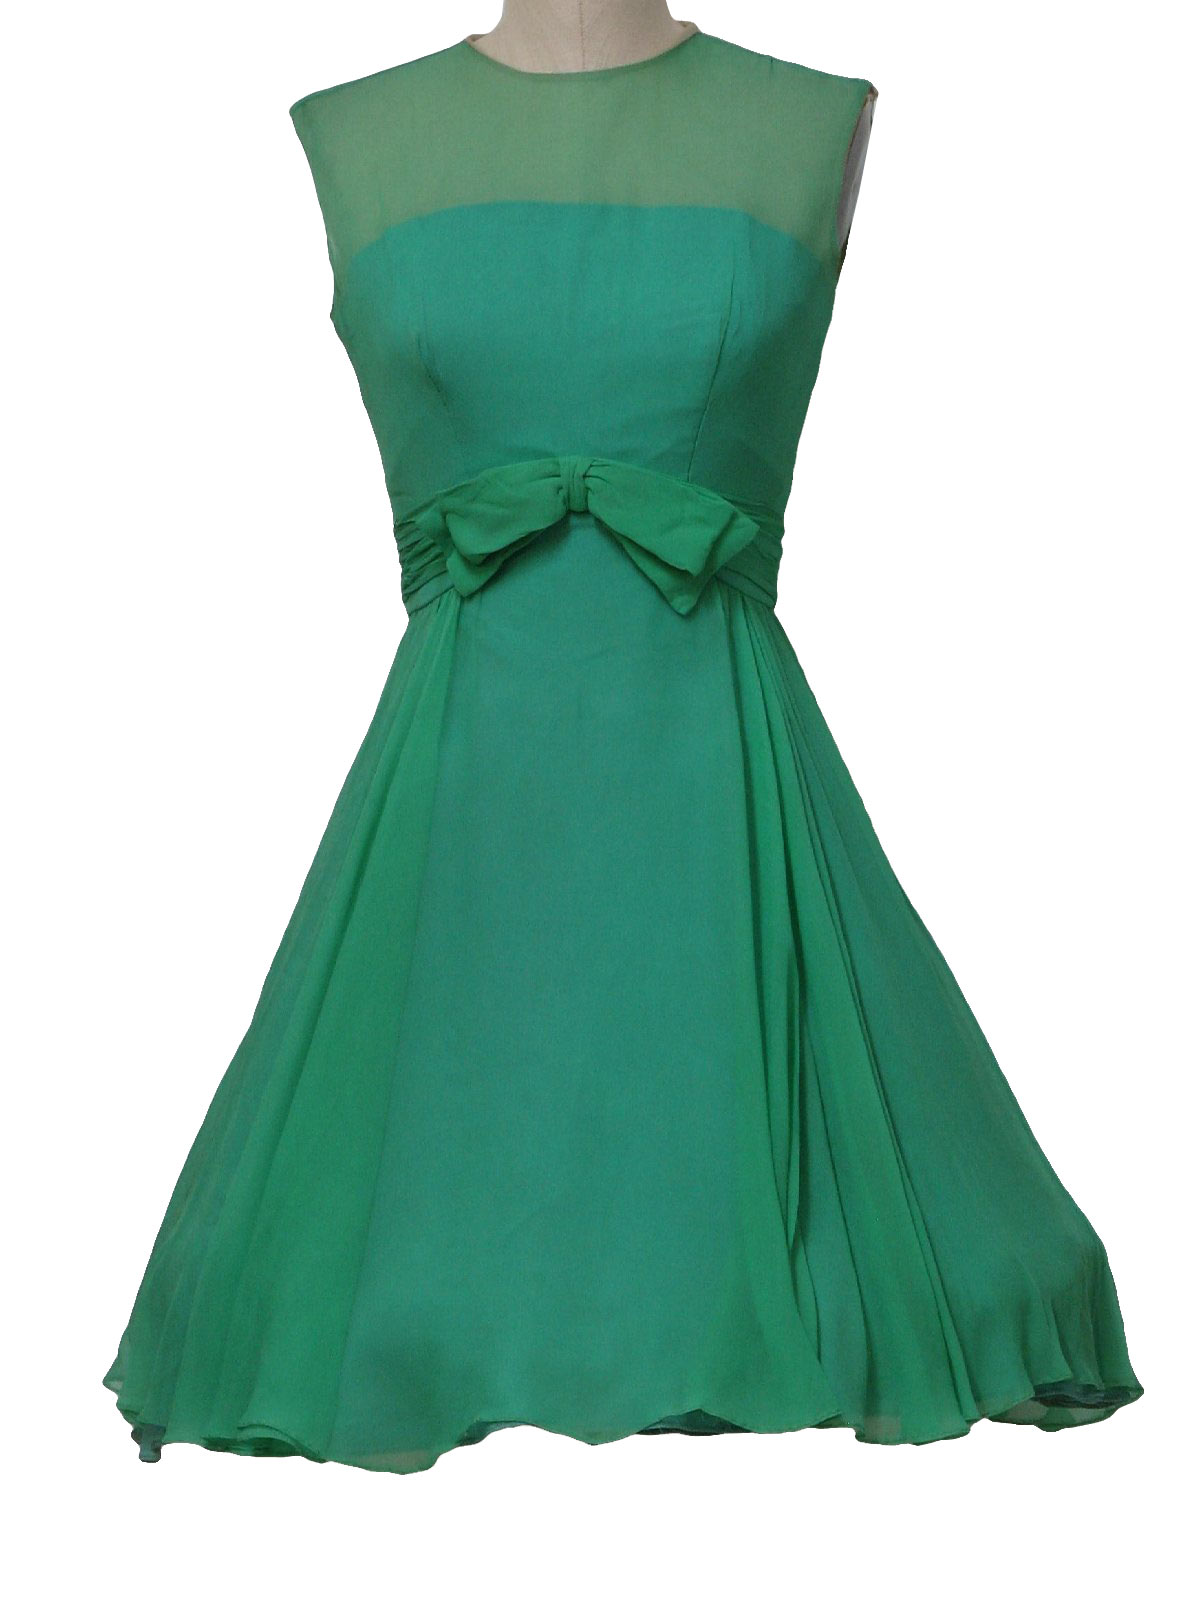 50s Cocktail Dress (Missing Label): 50s -Missing Label- Womens green ...